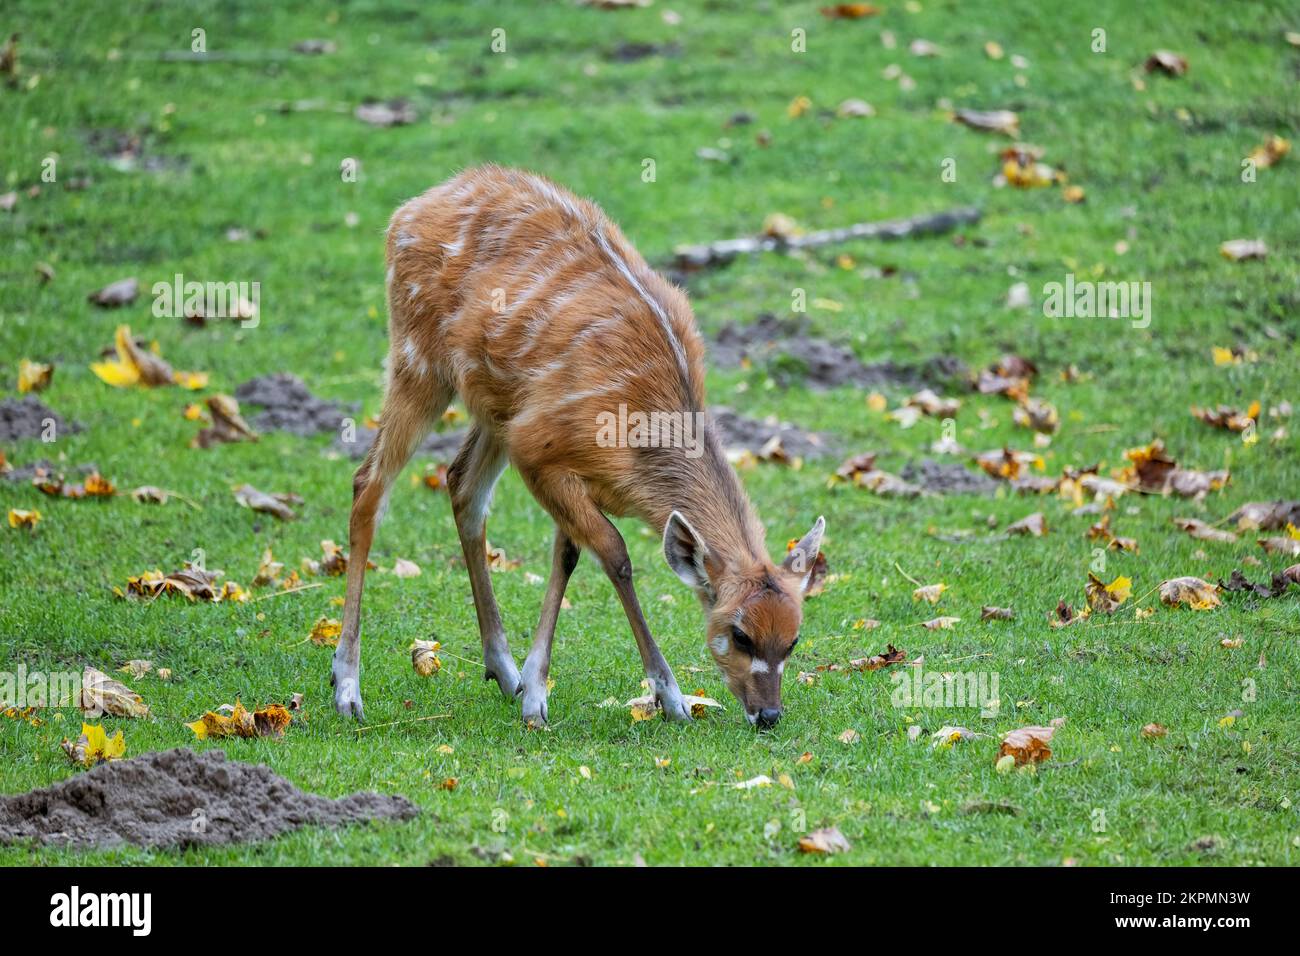 The sitatunga or marshbuck (Tragelaphus spekii gratus) grazing in the meadow, swamp-dwelling antelope in the family Bovidae, native region: central Af Stock Photo